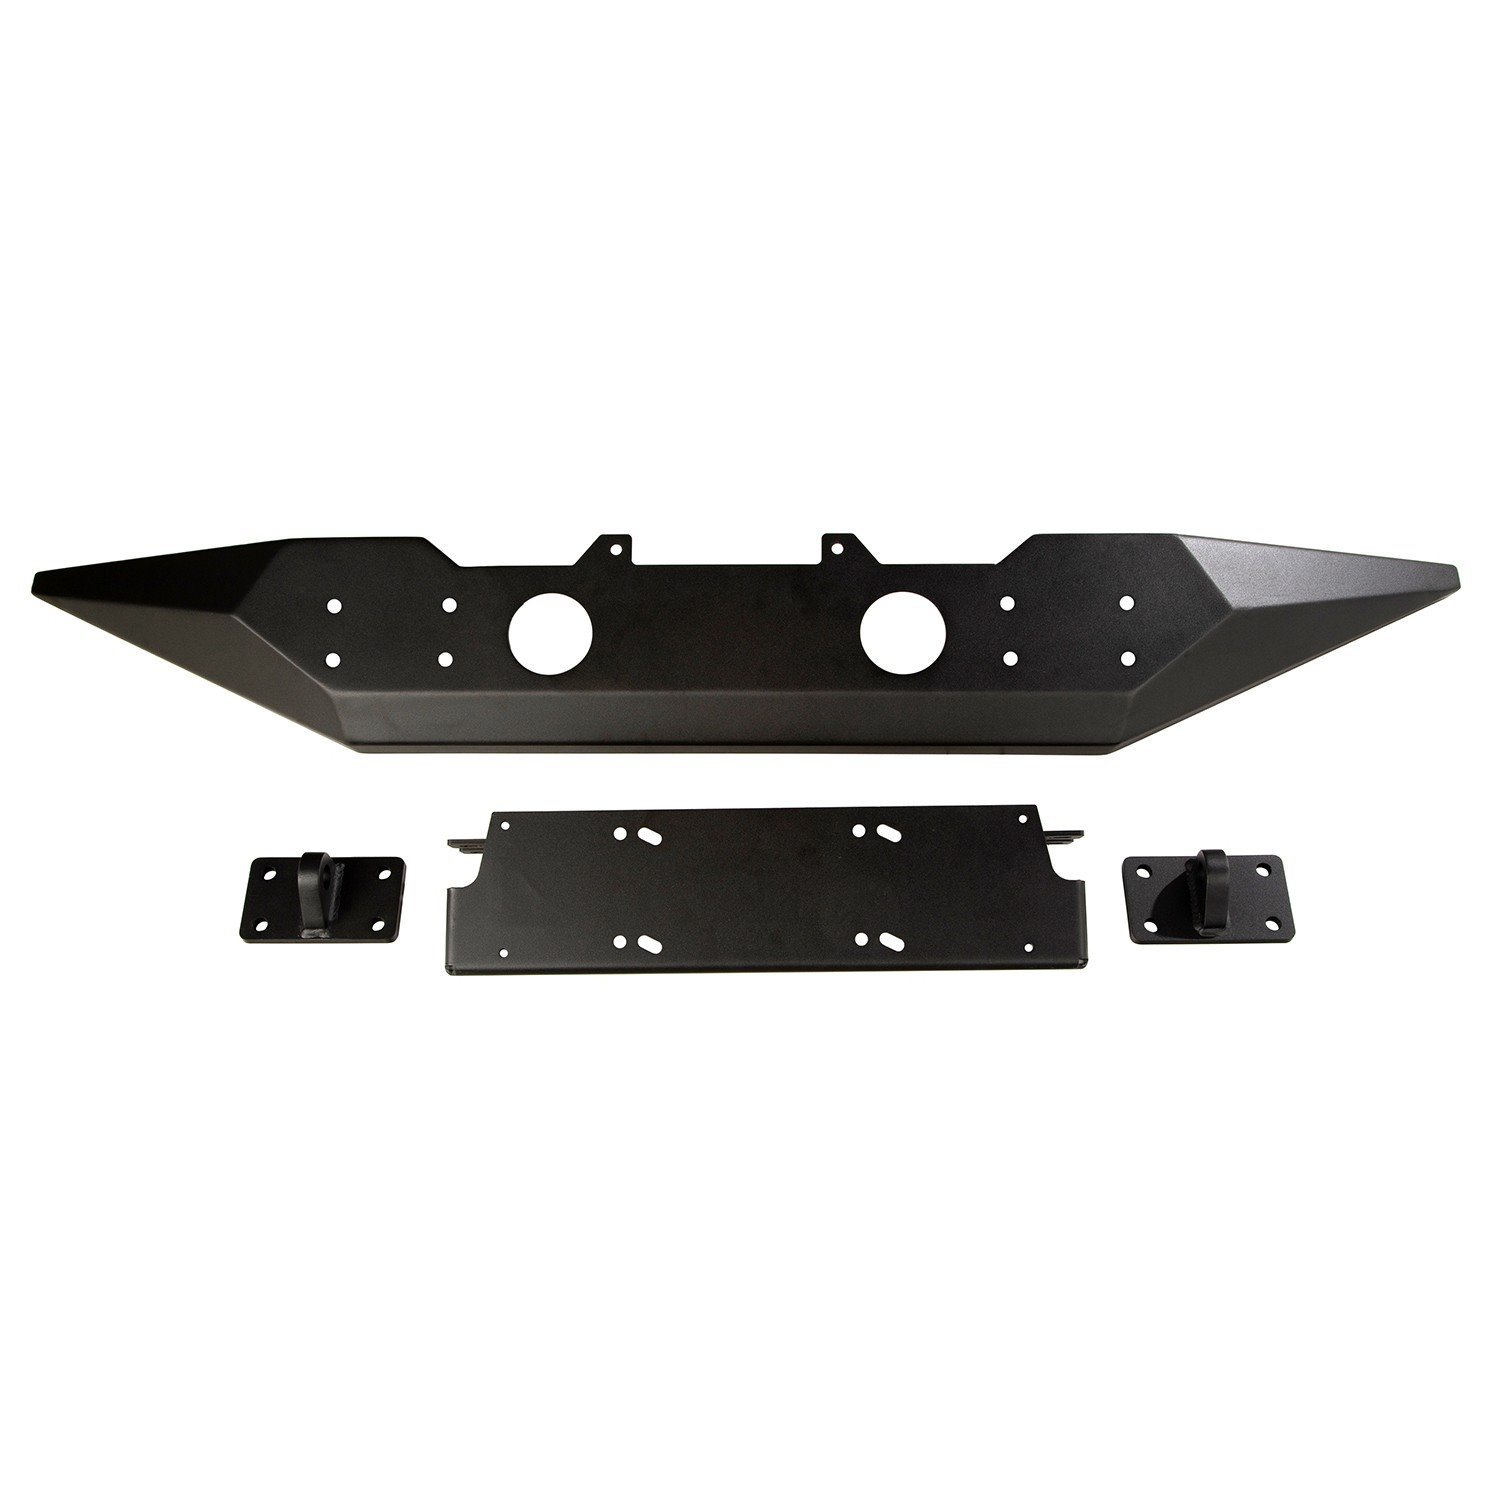 Standard Clearance Spartan Front Bumper Without Overrider for